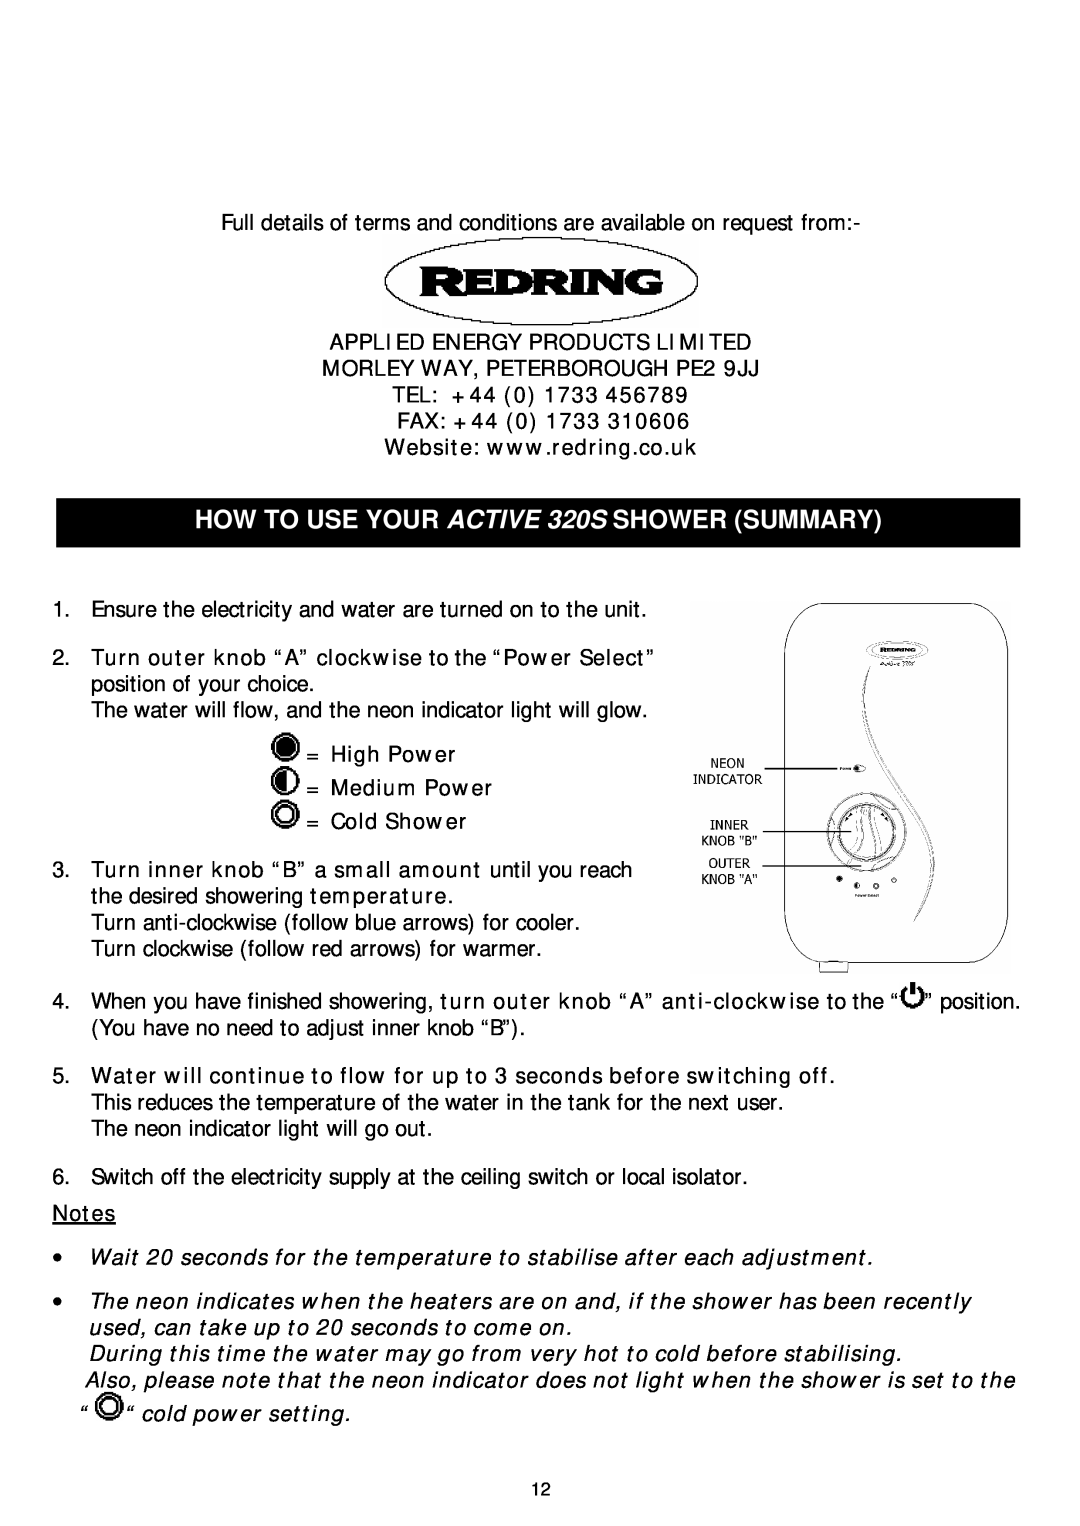 Redring manual HOW TO USE YOUR ACTIVE 320S SHOWER SUMMARY 